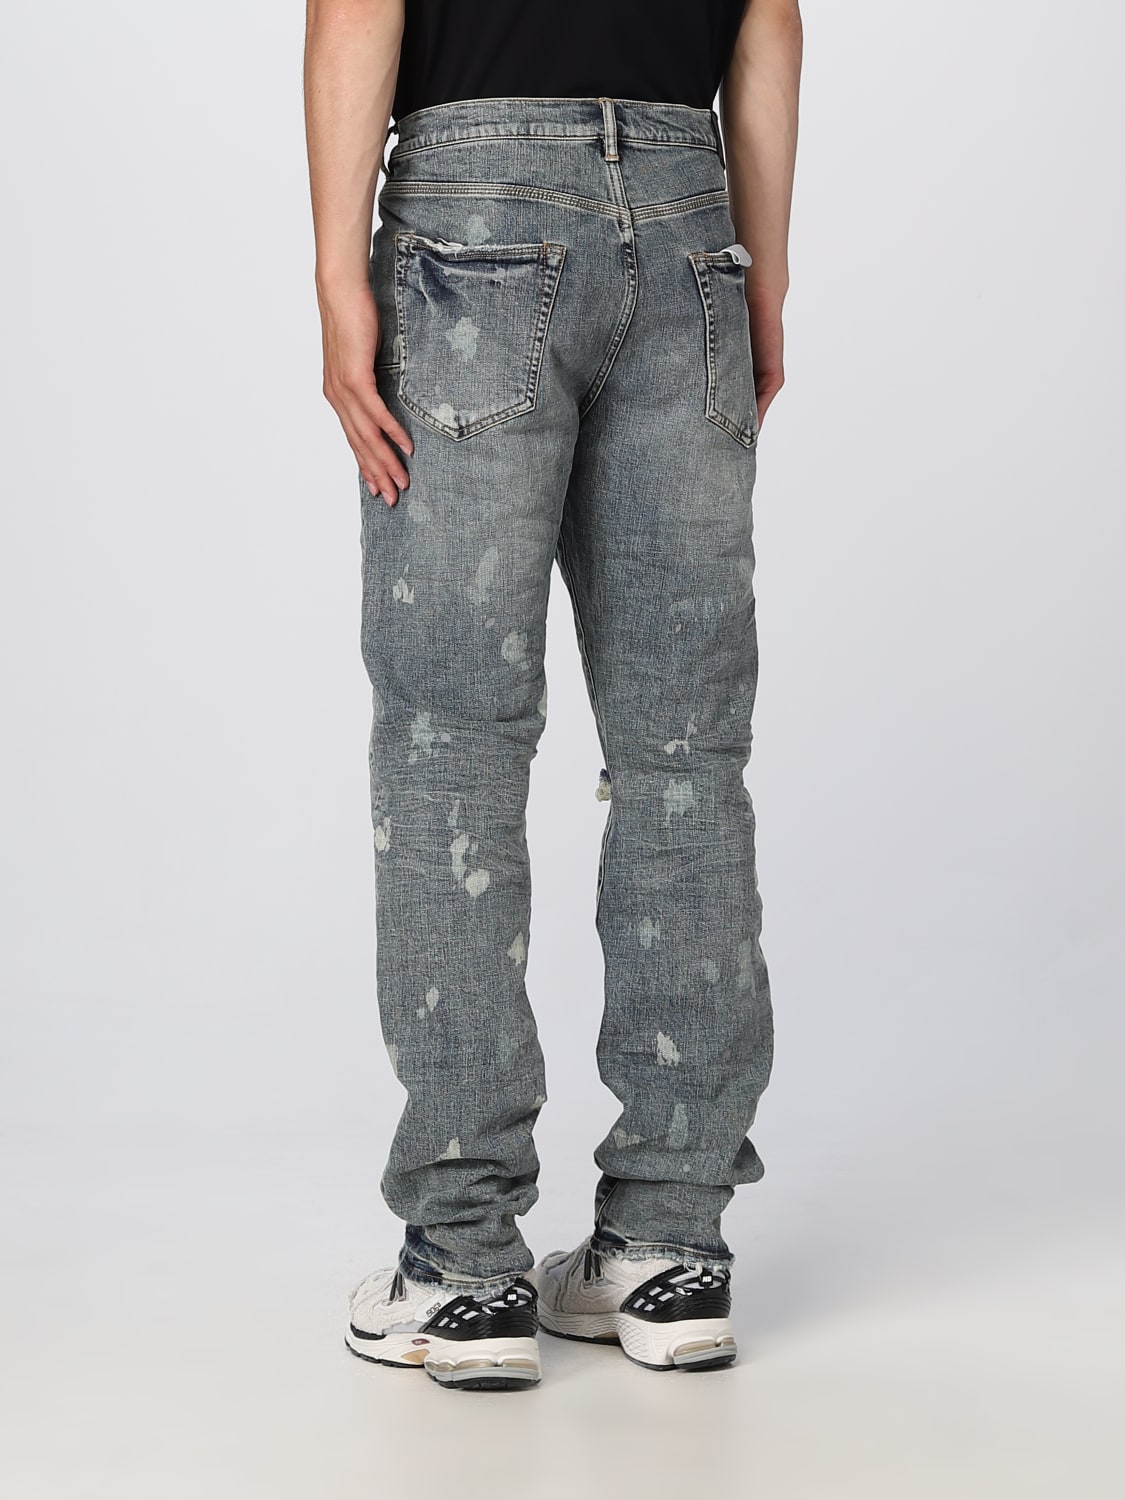 Purple Brand Outlet: jeans for man - Blue